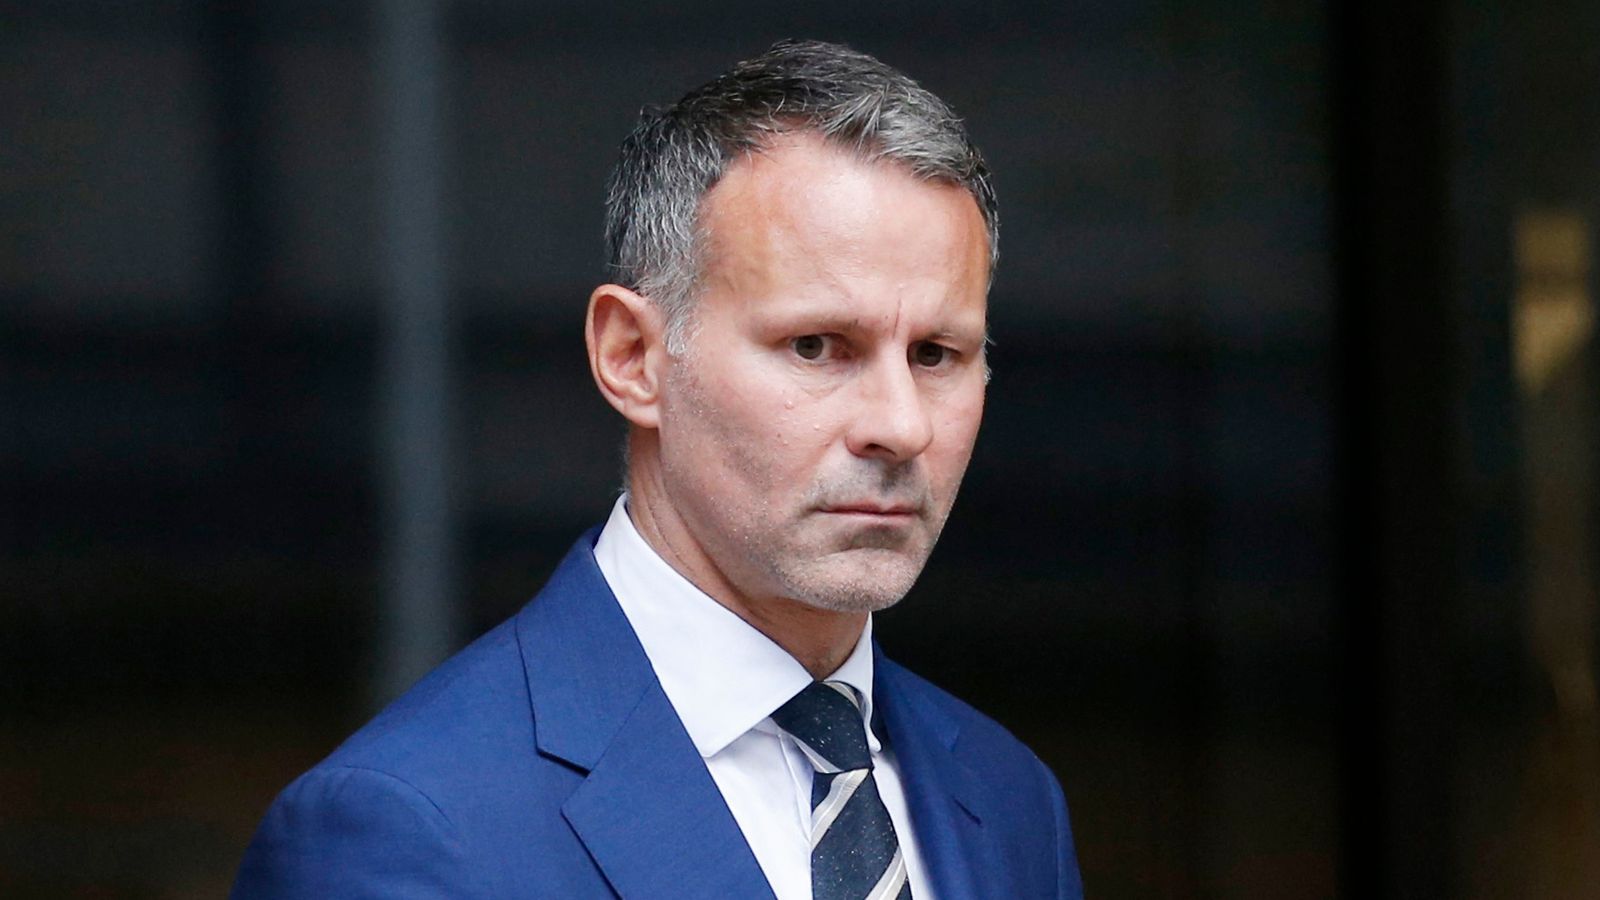 Ryan Giggs to face retrial over assault and controlling behaviour allegations